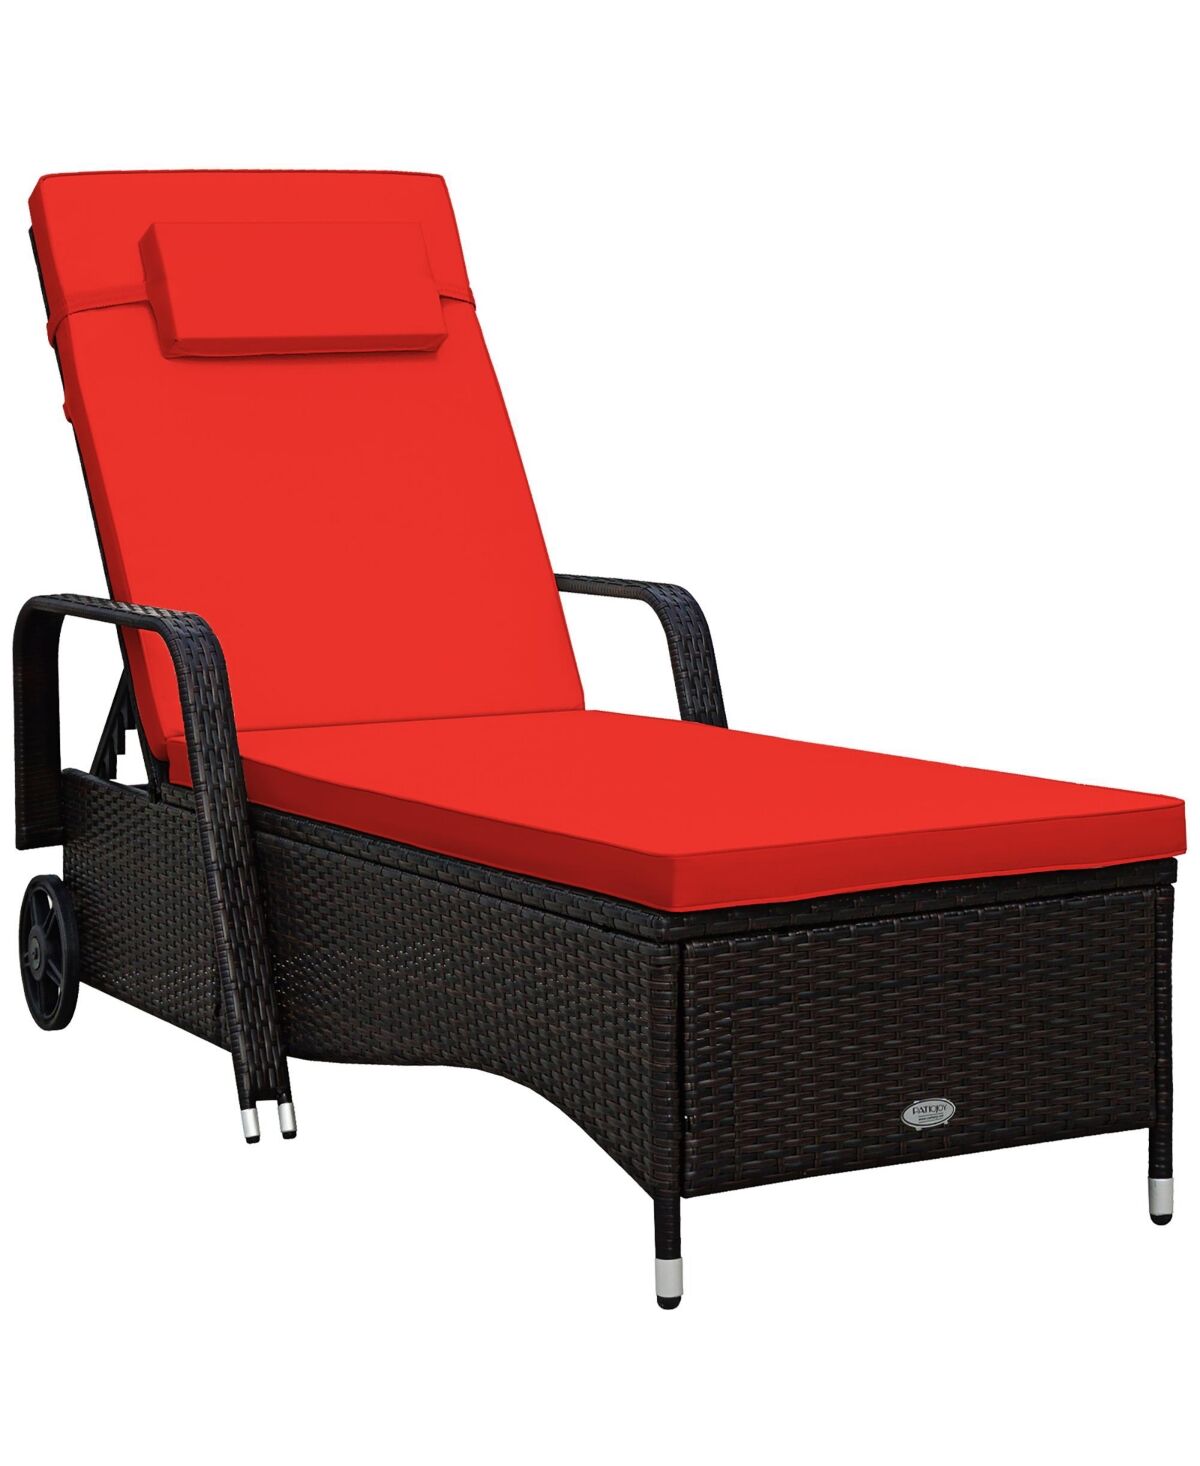 Costway Patio Rattan Lounge Chair Chaise Recliner Adjust Cushion - Red